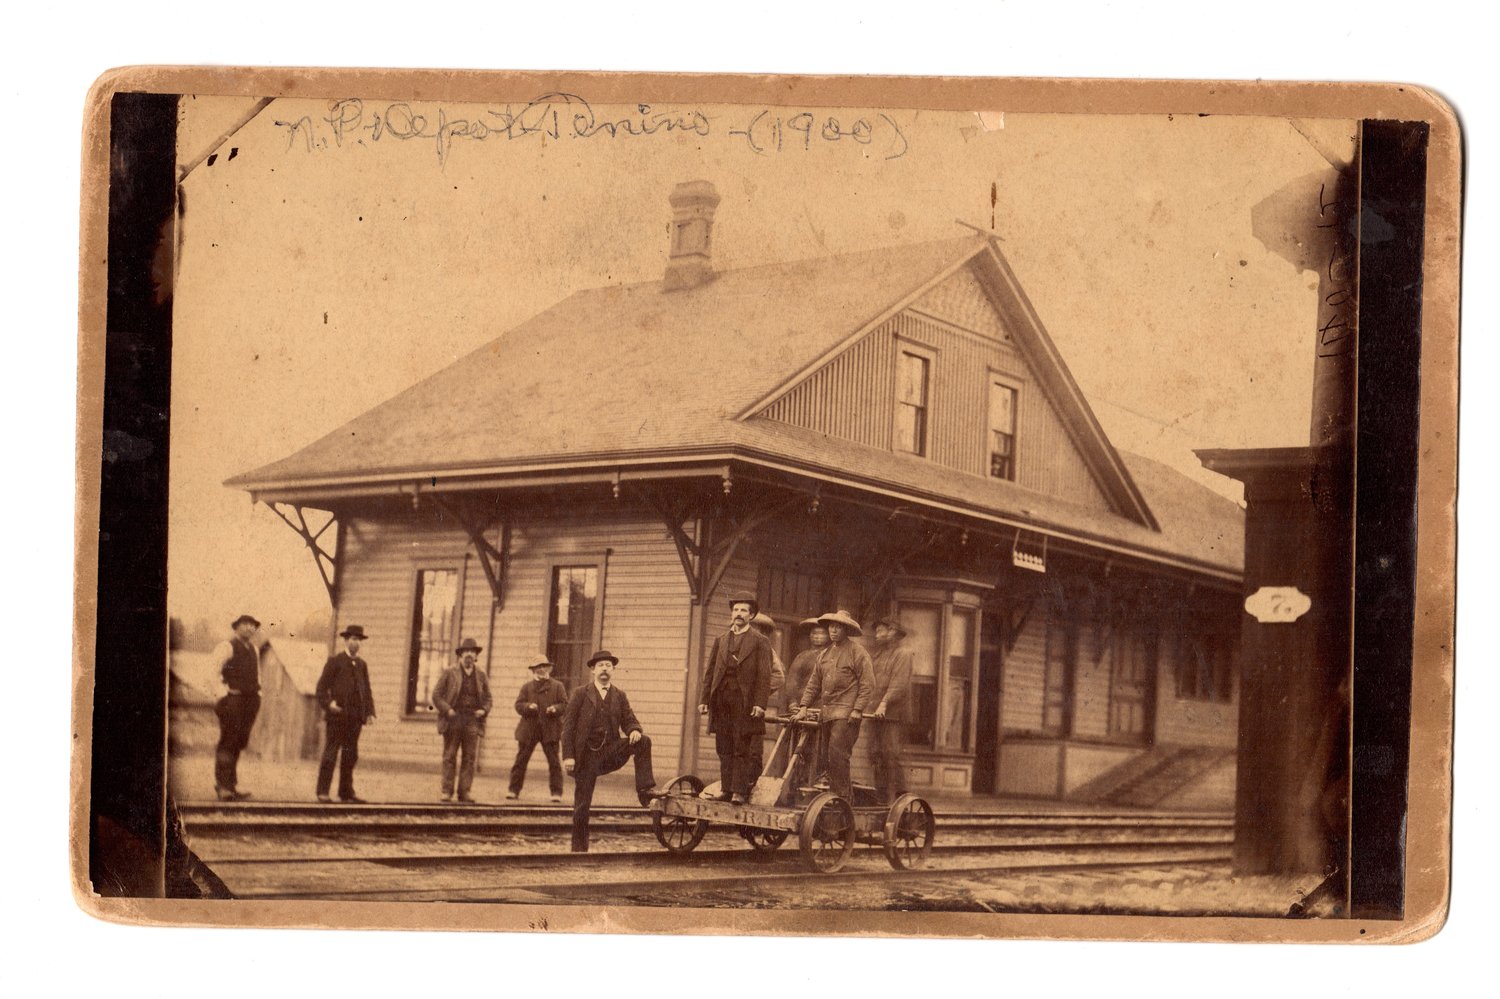 1876 to 1878 Depot:
The earliest known photo of Tenino. Four Chinese laborers stand on a Northern Pacific Railroad hand cart in front of the Tenino train depot. The man with his left leg propped on the wheel of the handcart is Billy Houston, who ran the hotel pictured in the photo from 1883. According to Tenino Historian Richard Edwards, Houston came into Tenino with the railroad in 1872 and left in about 1890.